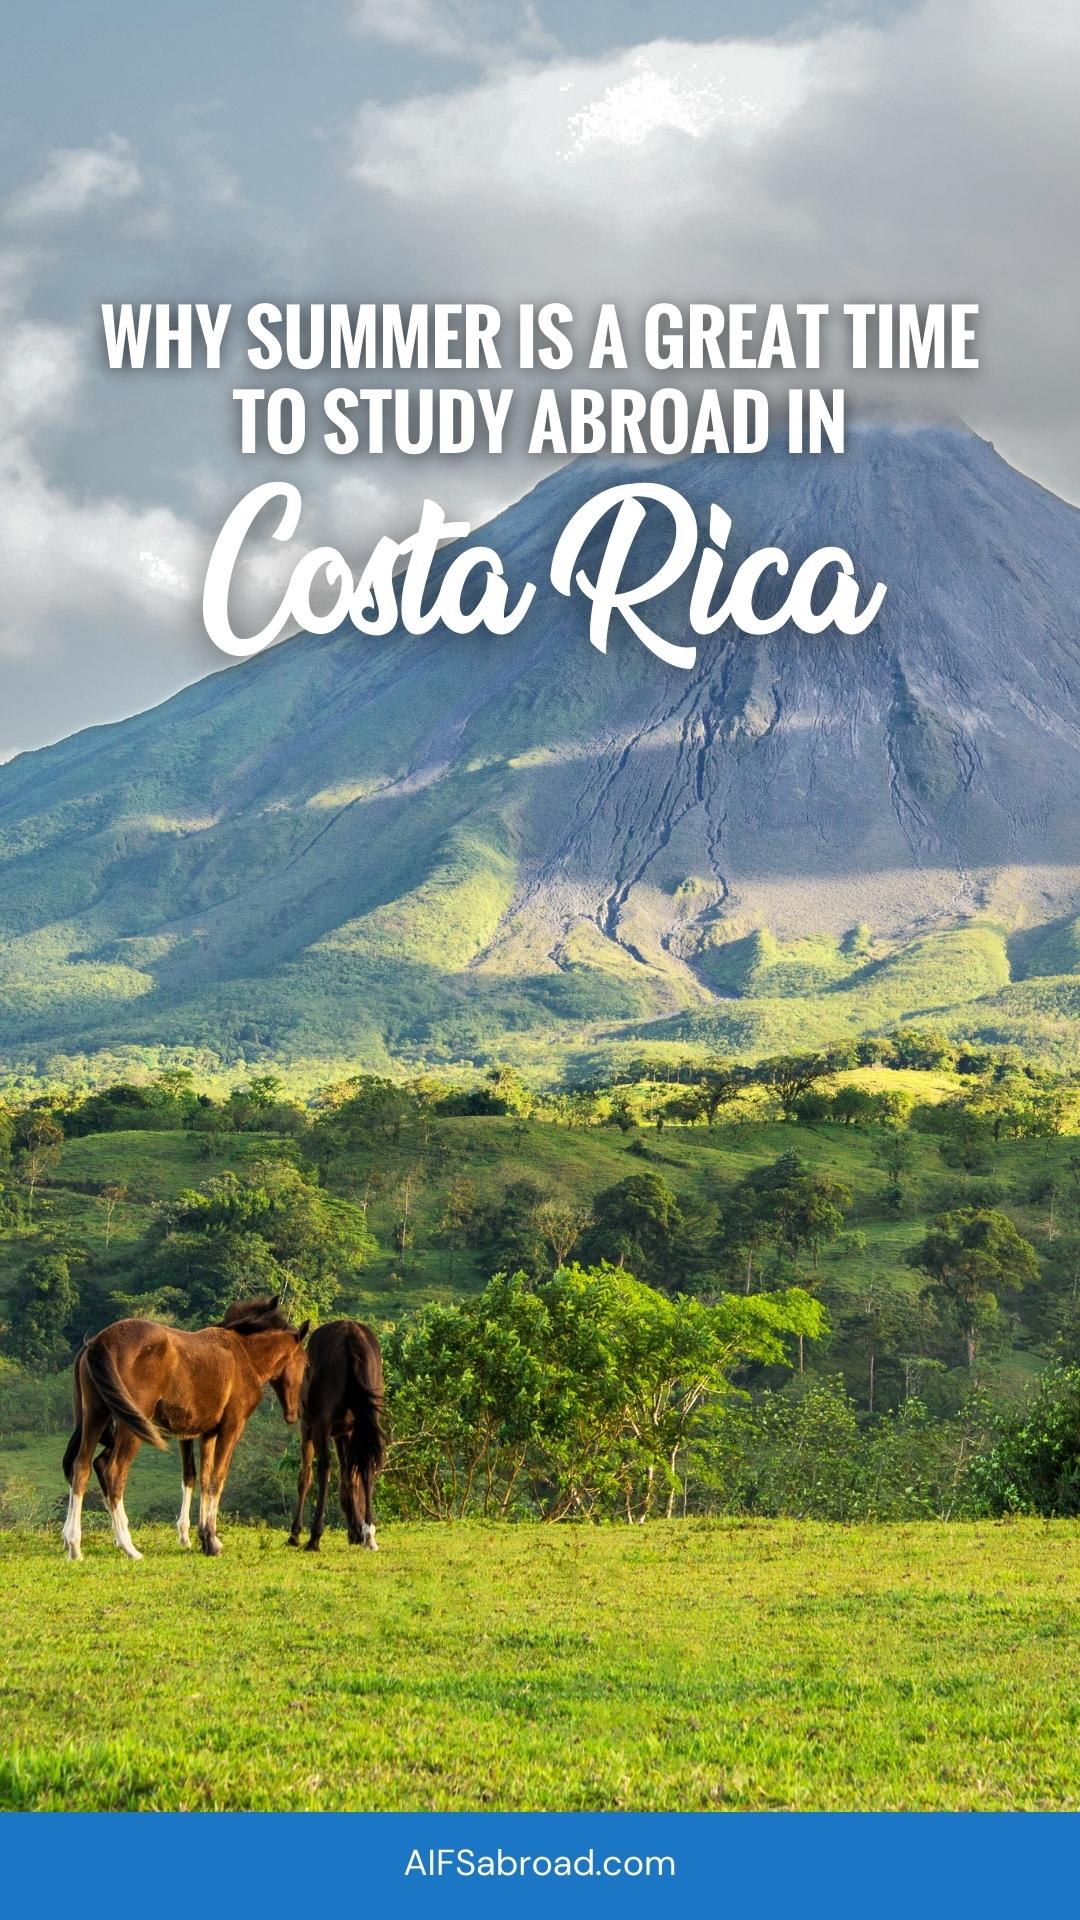 Pin Image - Why Summer is a Great Time to Study Abroad in Costa Rica - AIFS Abroad